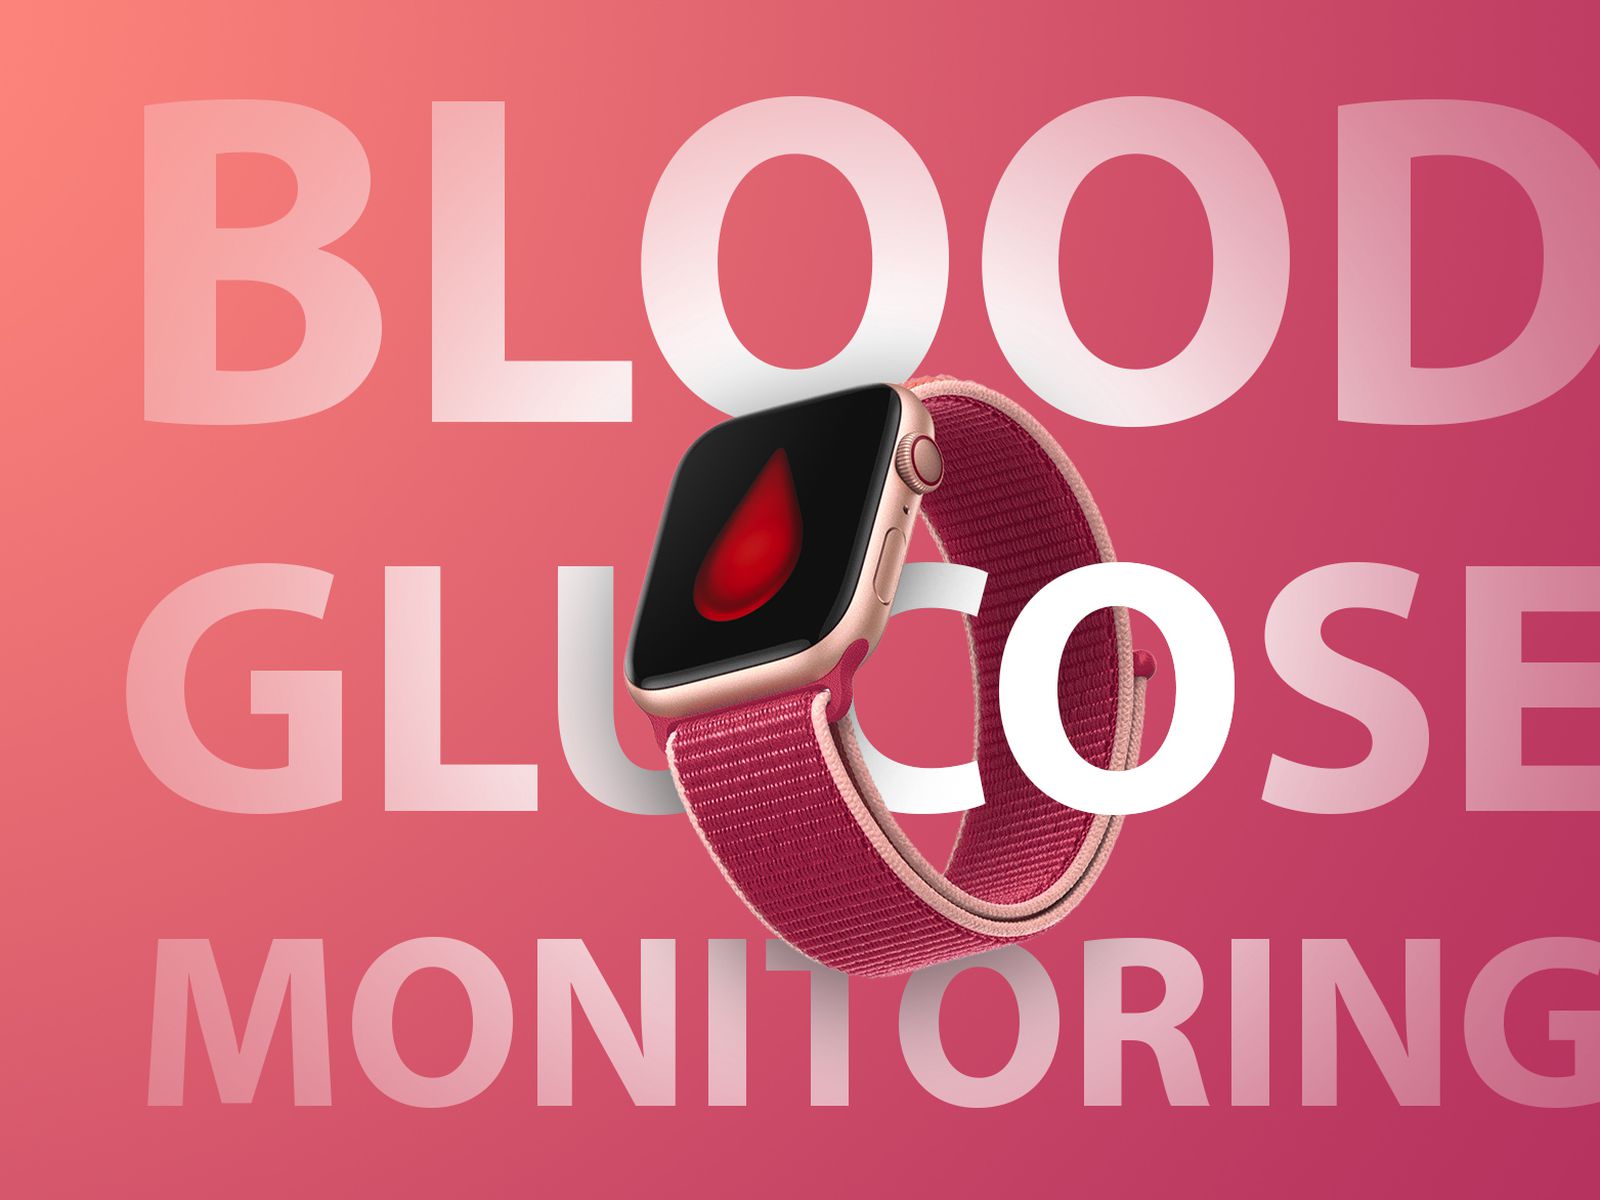 Apple Watch to Ditch Blood Pressure and Blood Sugar Sensors This Year,  Other Health Features Expected